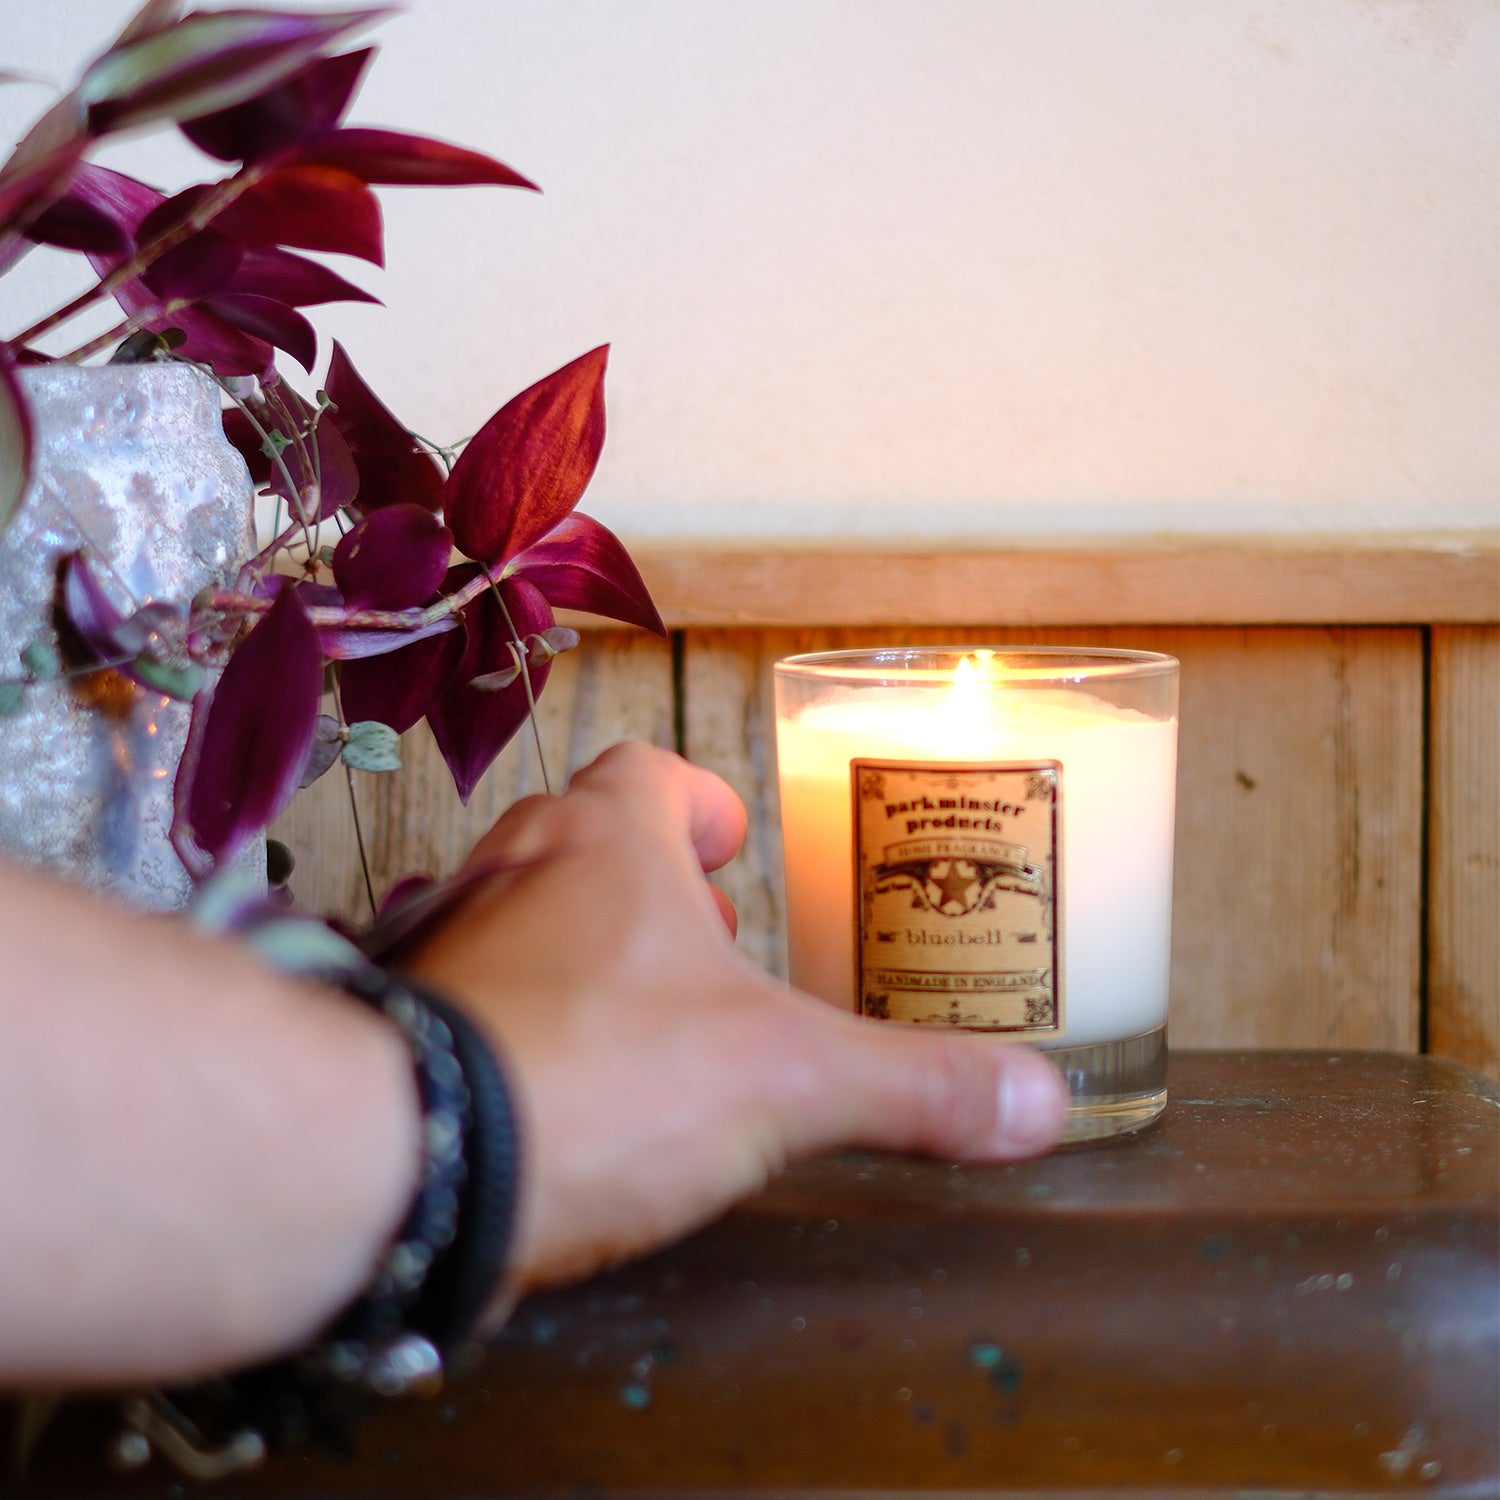 Parkminster's large votive soy wax candles, handcrafted with a unique bluebell scent, created in our Cornish workshop by skilled artisans